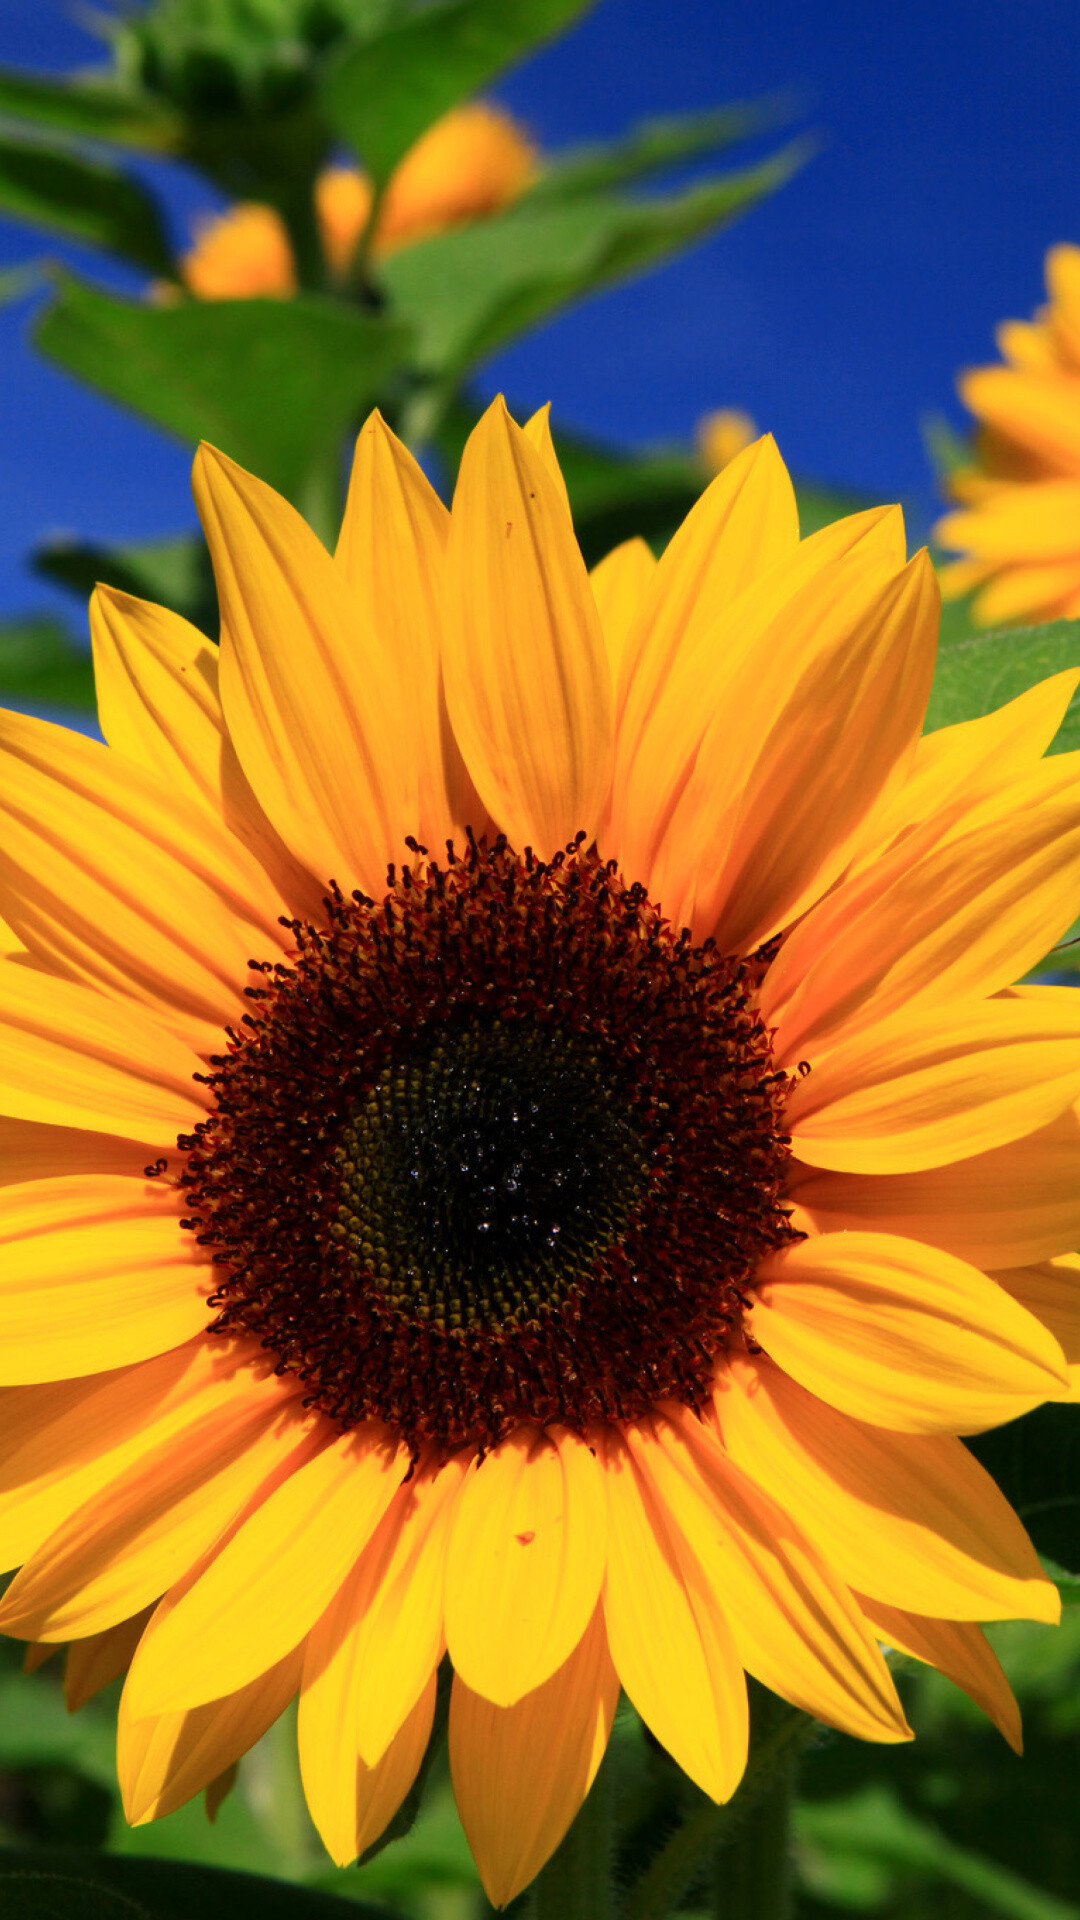 Sunflower: An annual plant with a large daisy-like flower face. 1080x1920 Full HD Wallpaper.